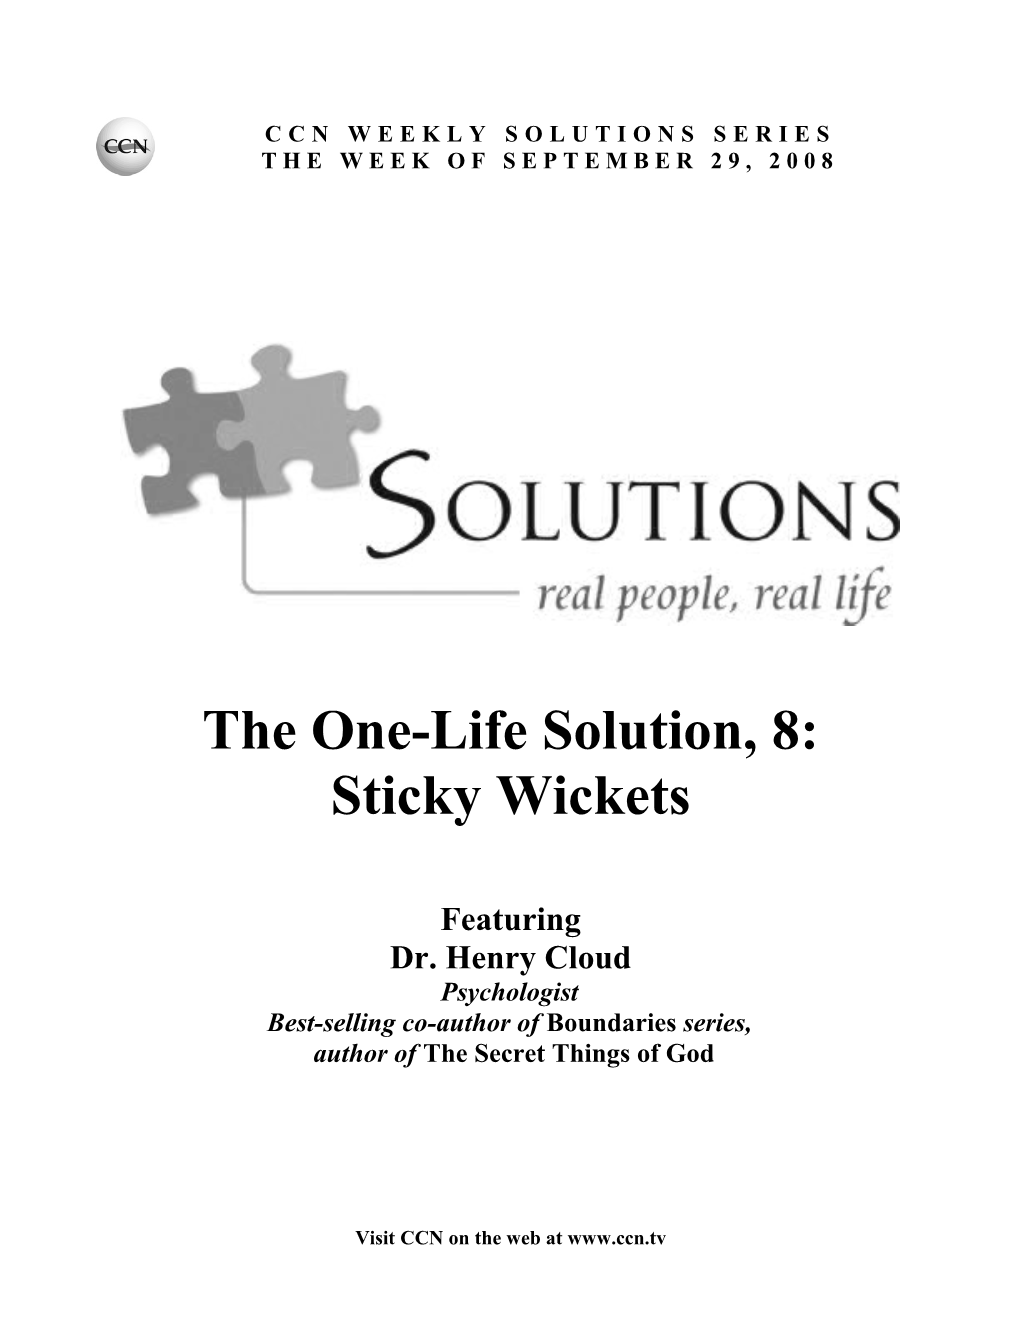 CCN Solutions: the One-Life Solution, 8: Sticky Wickets Page 2